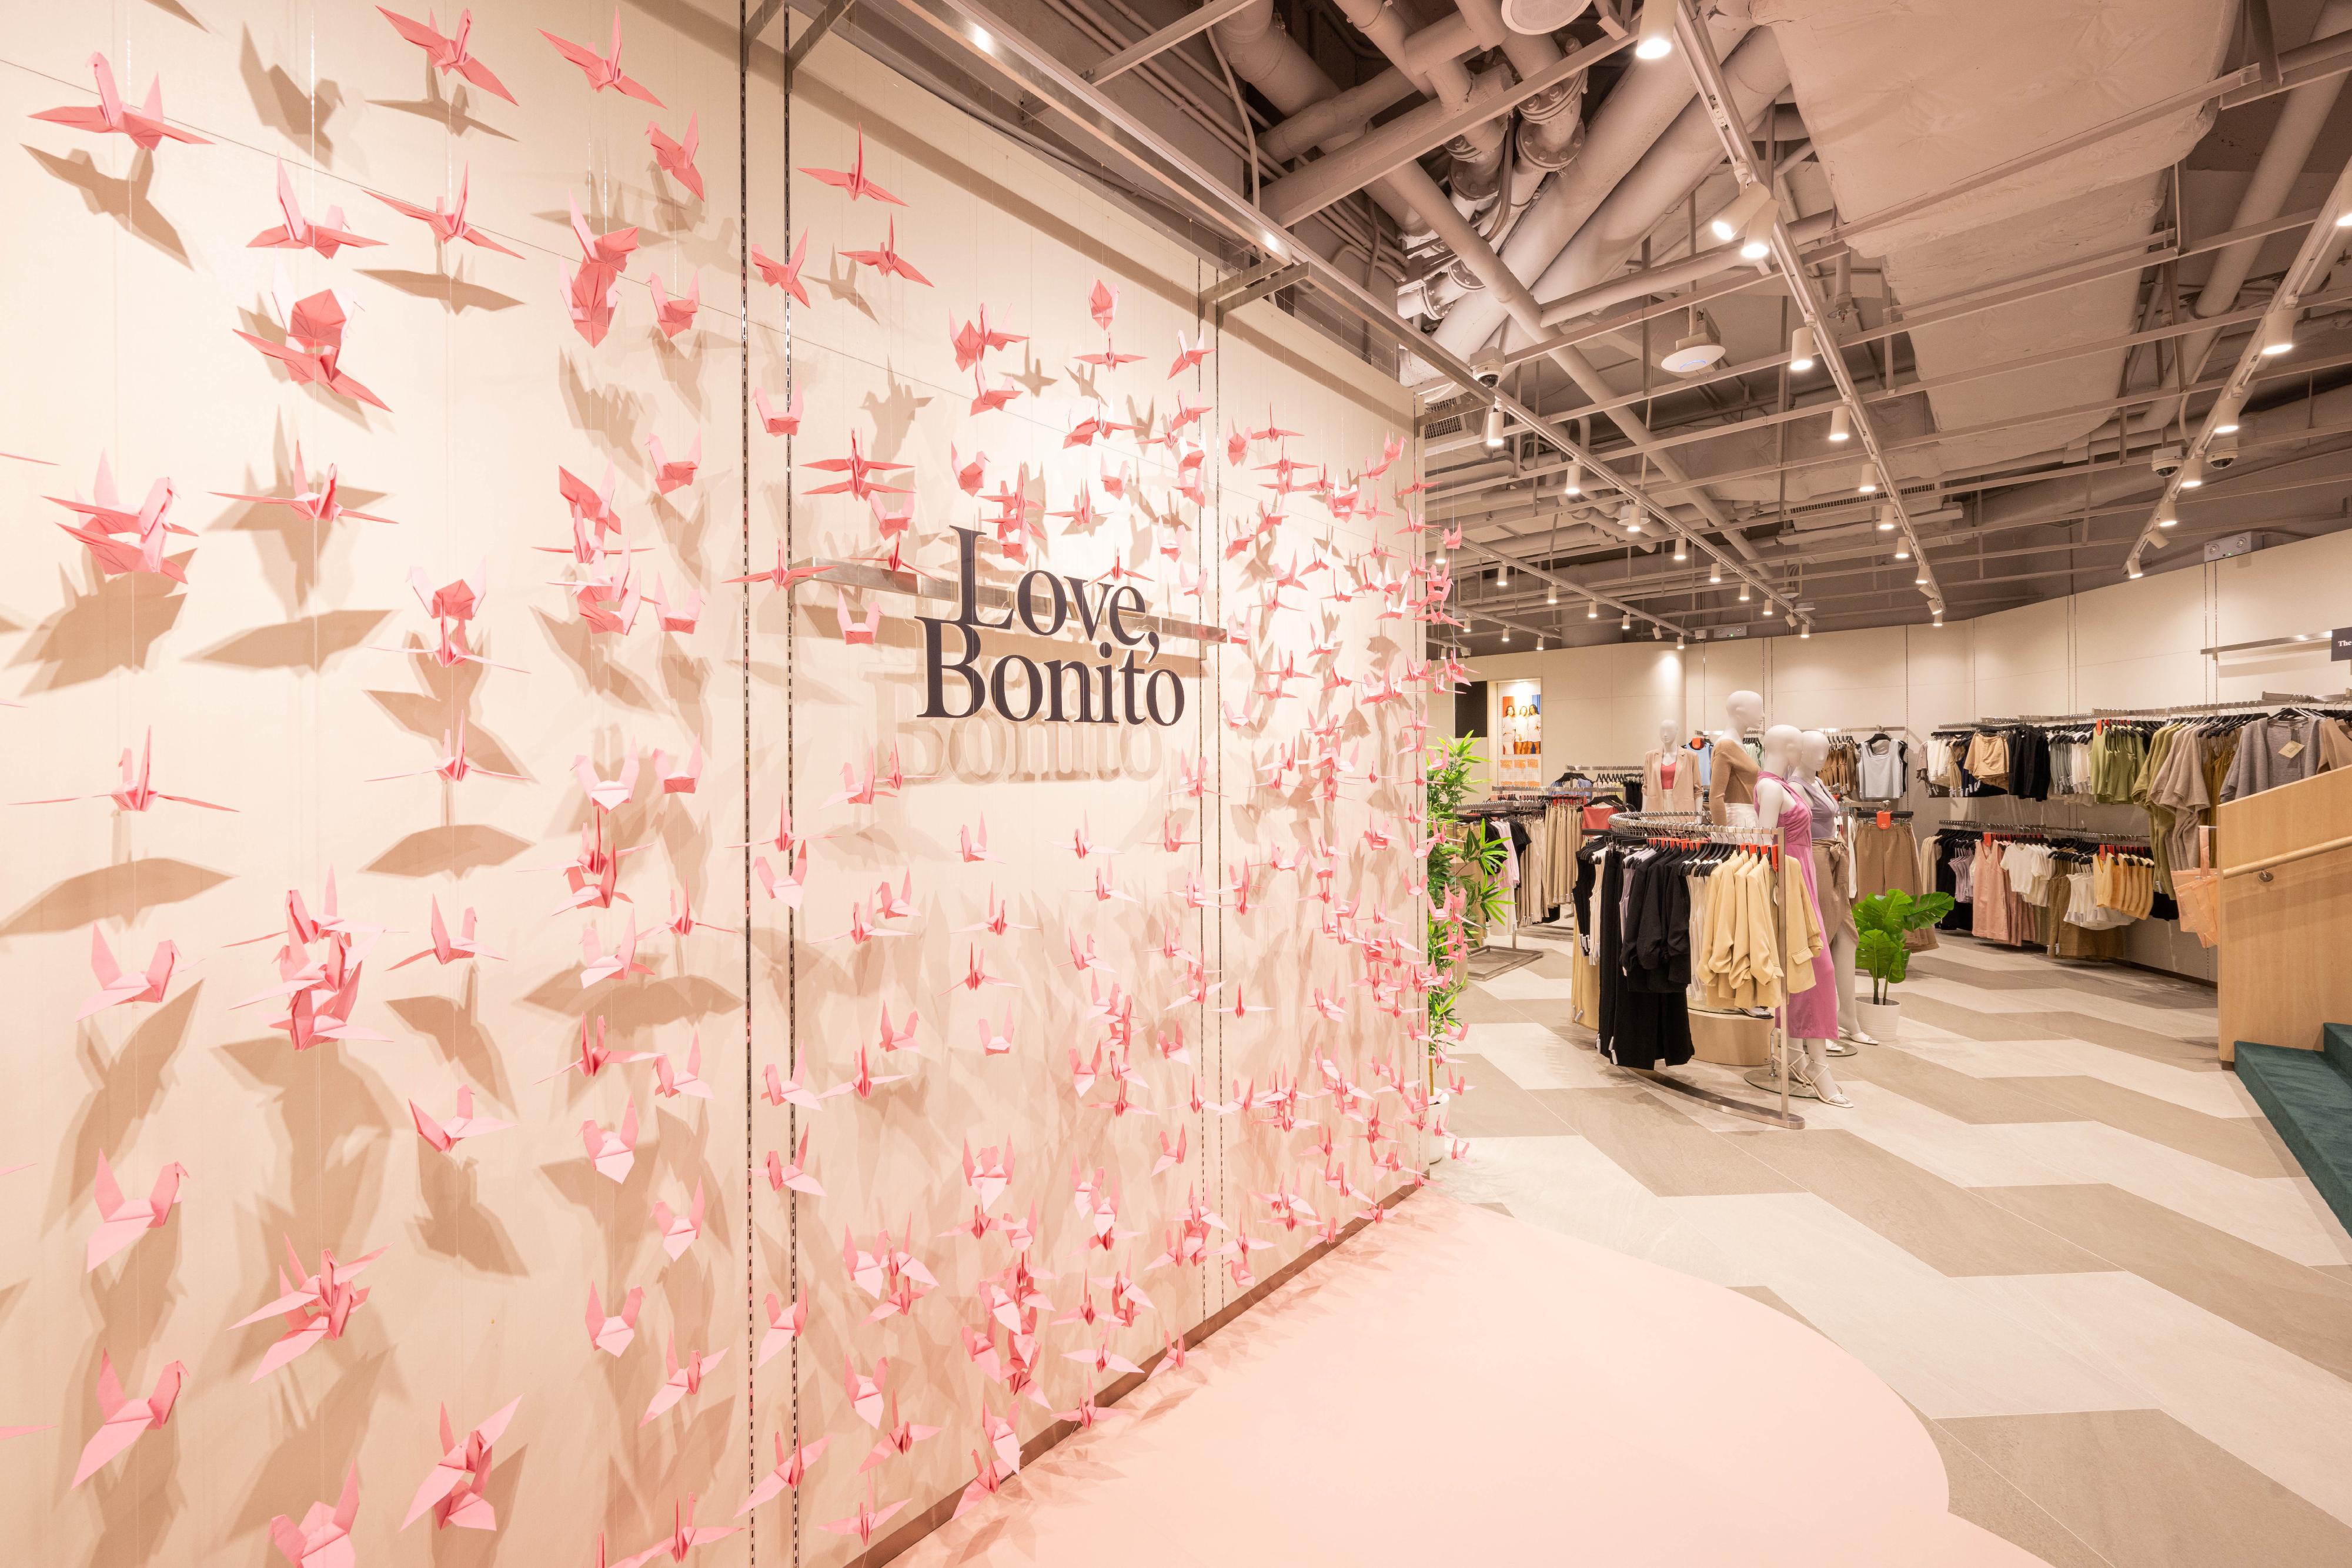 Southeast Asia's leading womenswear brand, Love, Bonito, officially opened its Hong Kong flagship store today (July 22). It offers Asian-centric fit and functional, yet trendy, women's clothing to customers in Hong Kong. 
